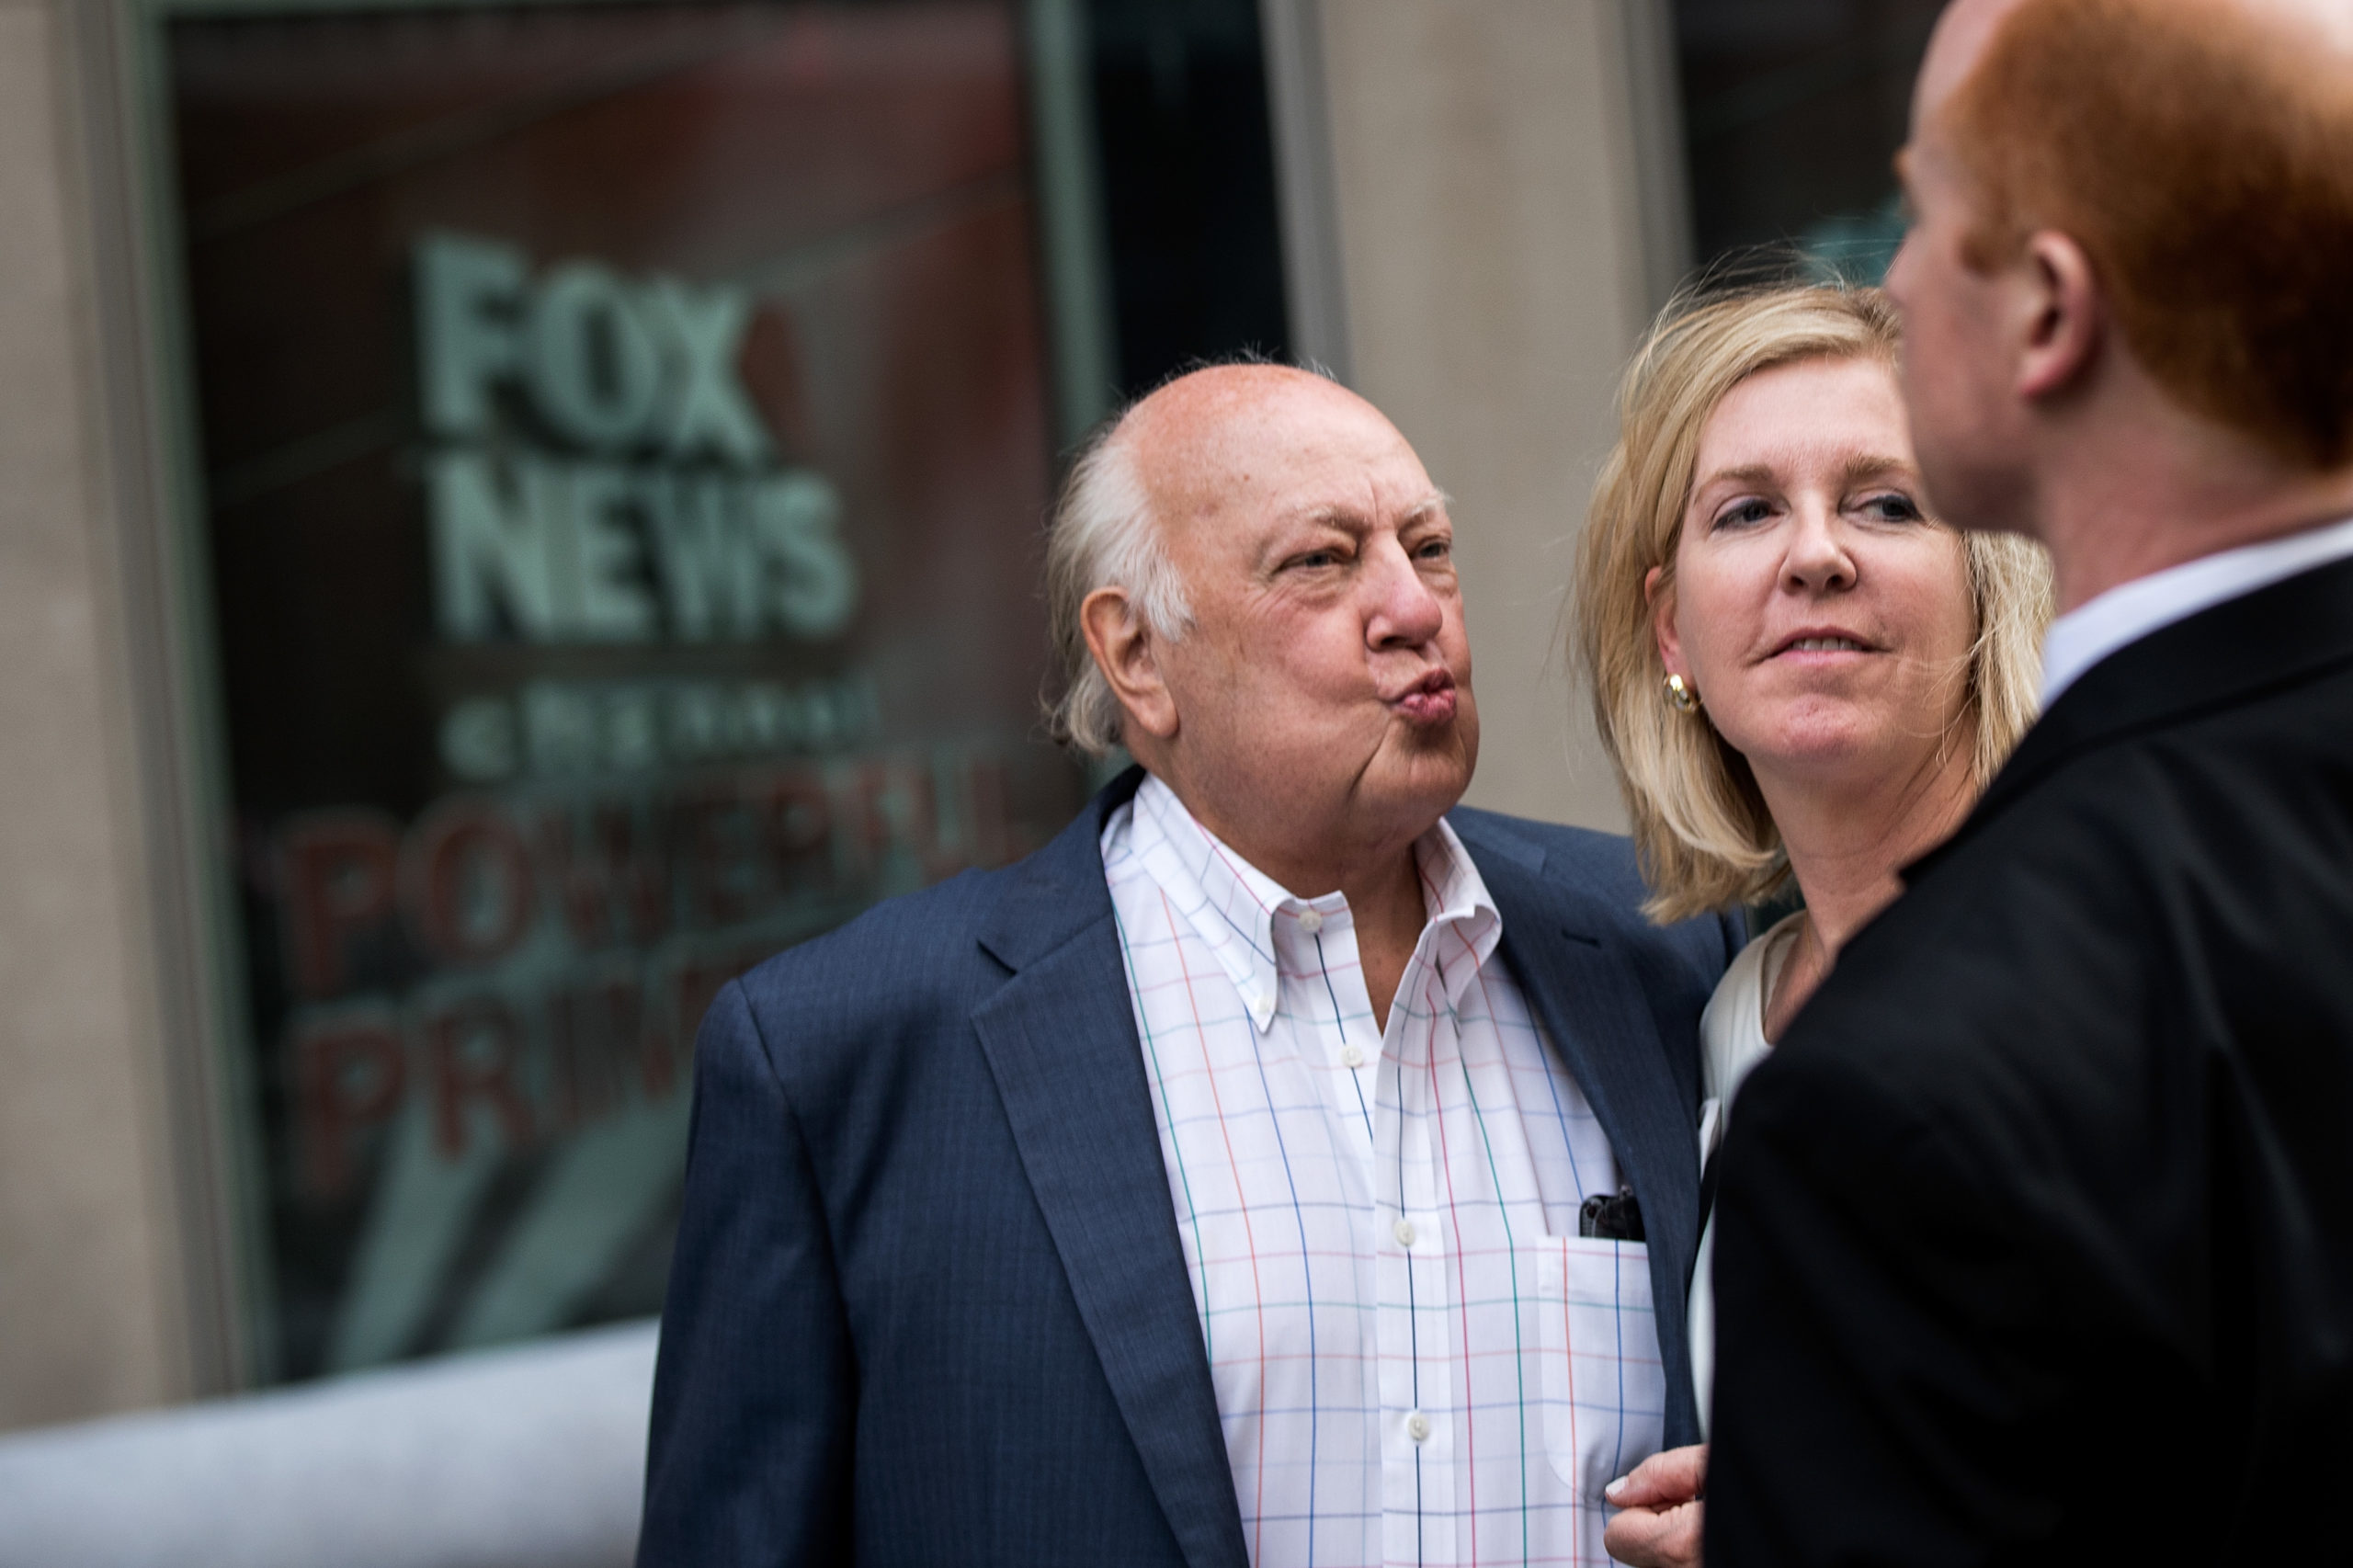 Fox News chairman Roger Ailes walks with his wife Elizabeth Tilson as they leave the News Corp building, July 19, 2016 in New York City. caption (Photo: Drew Angerer, Getty Images)